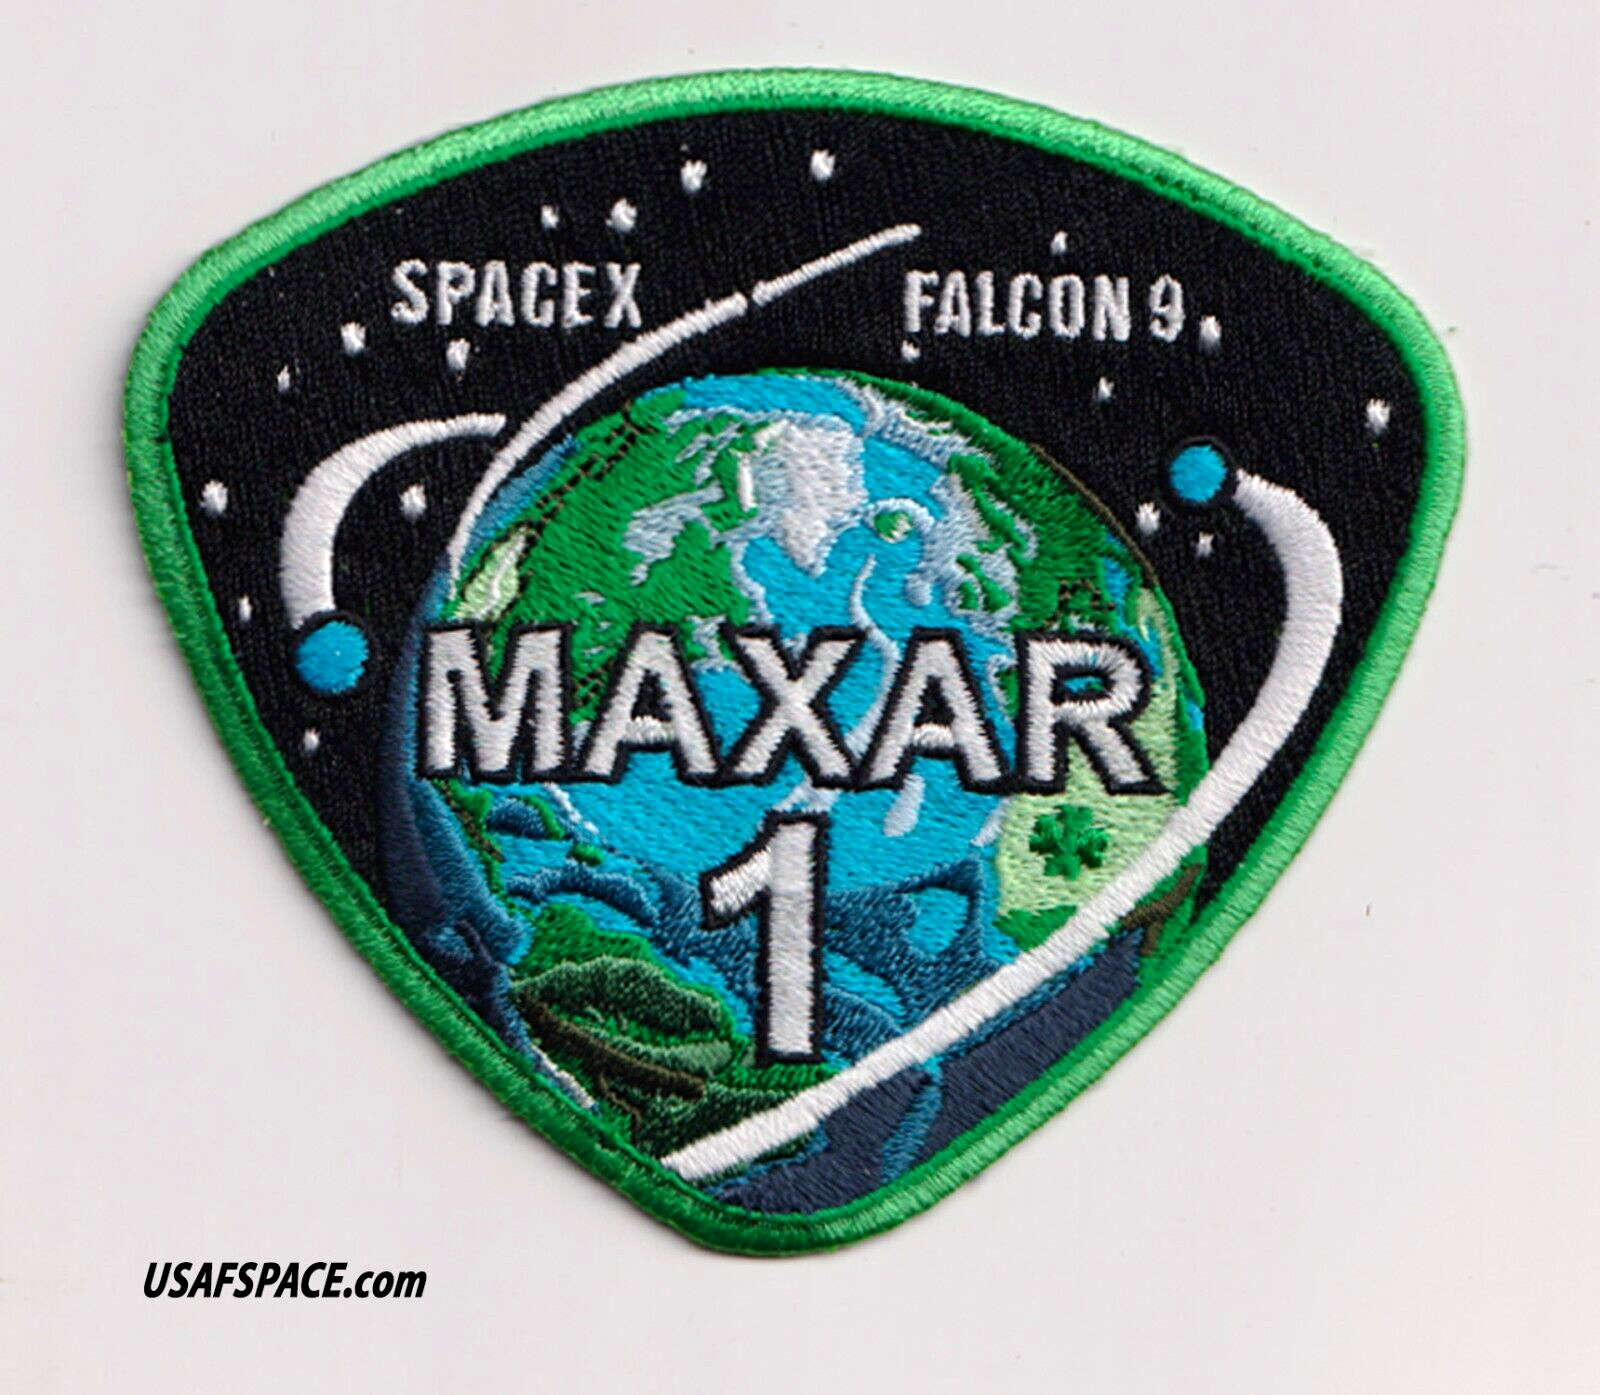 Authentic SPACEX MAXAR 1 FALCON 9 Launch SATELLITE Mission PATCH